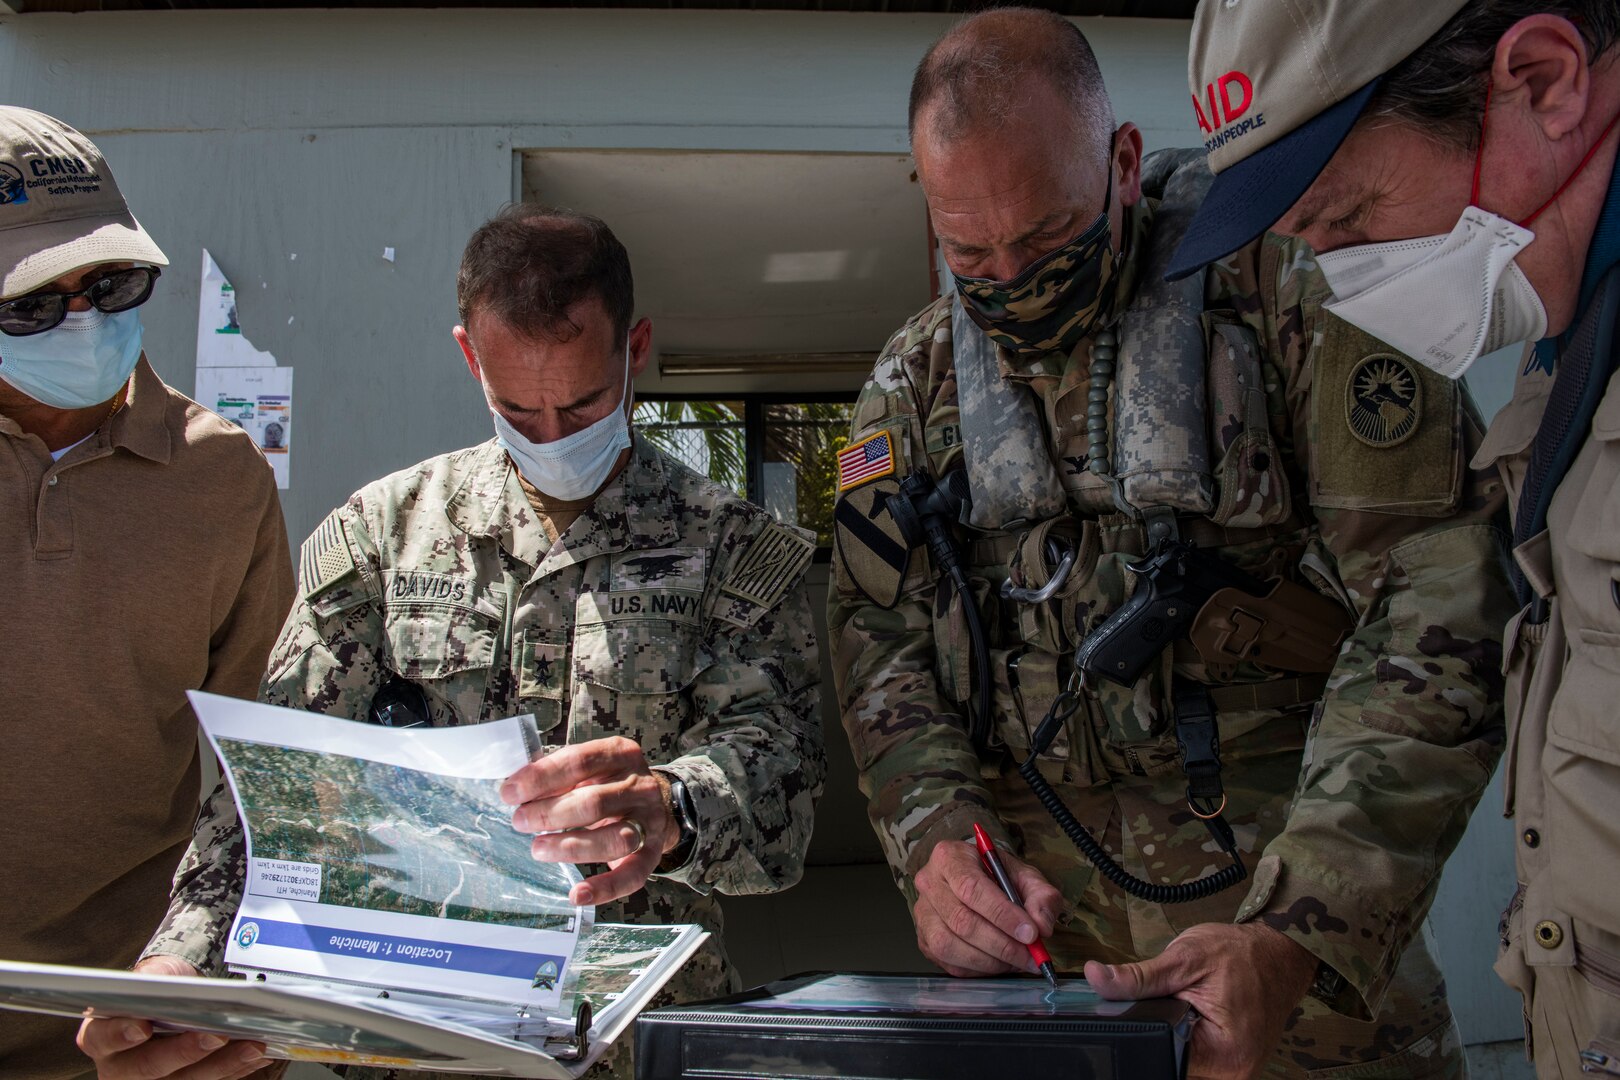 Military leaders look at briefing slides in a folder.